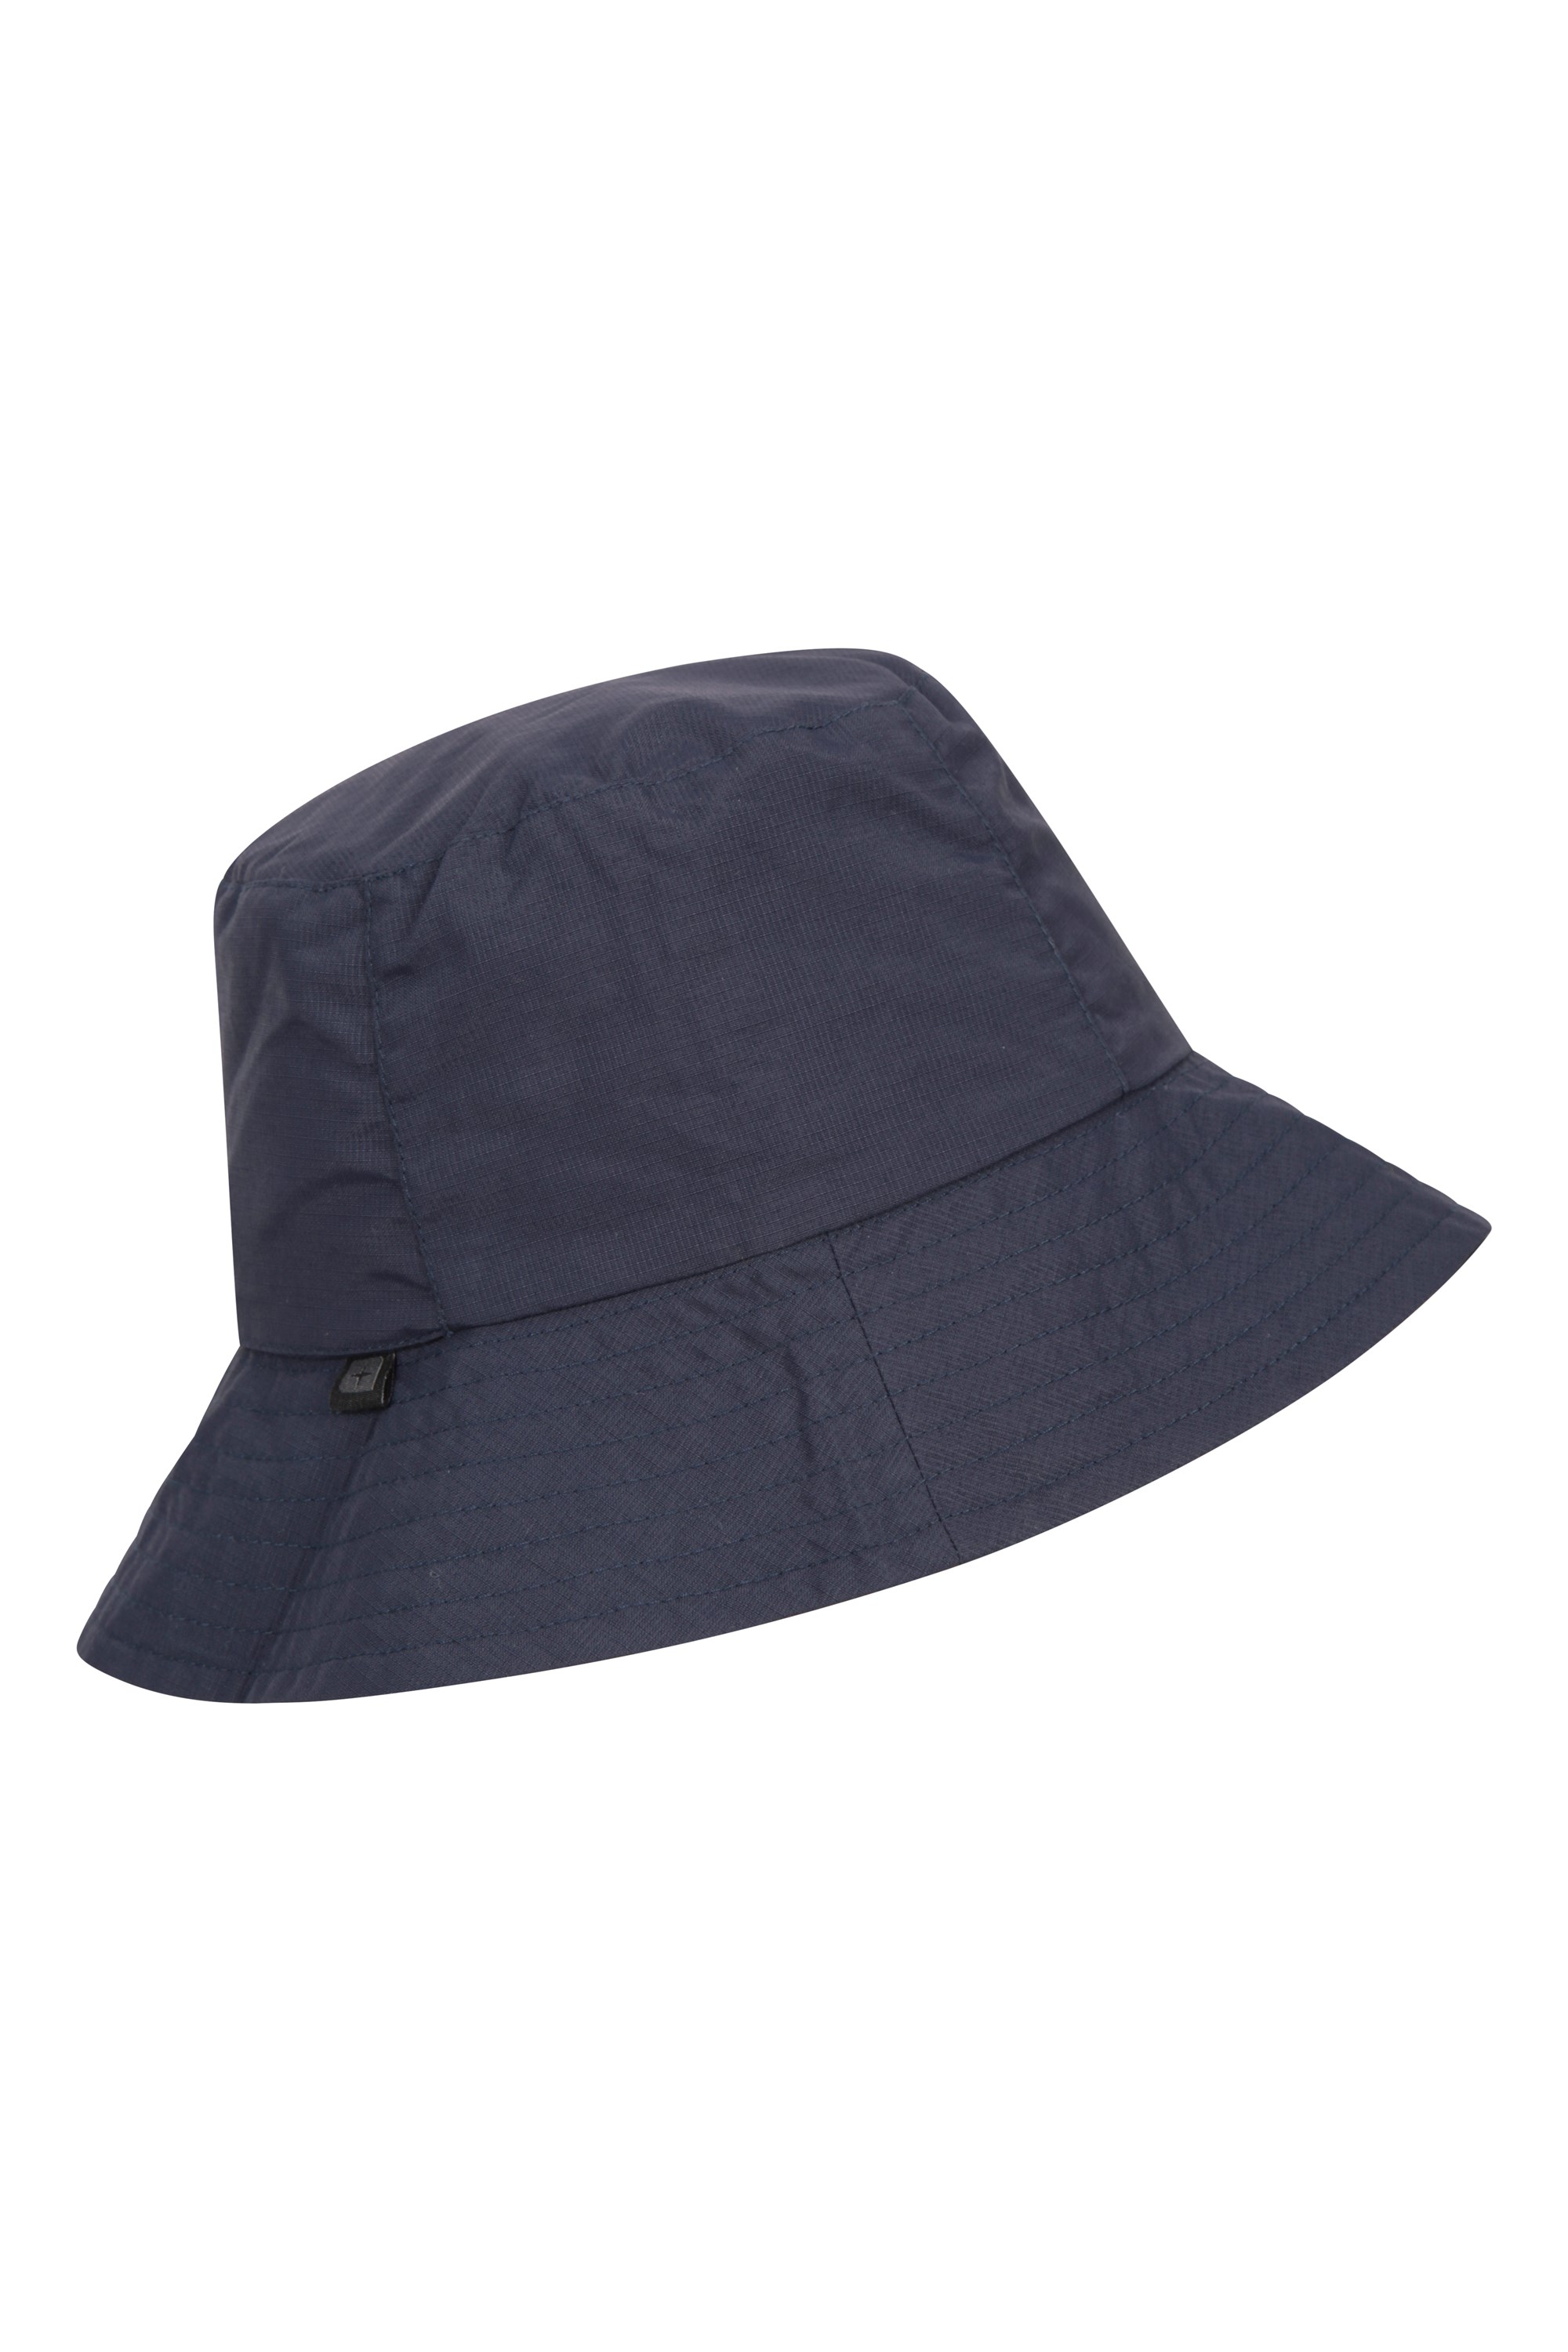 Mountain Warehouse Womens Packable Bucket Hat - Navy | Size ONE